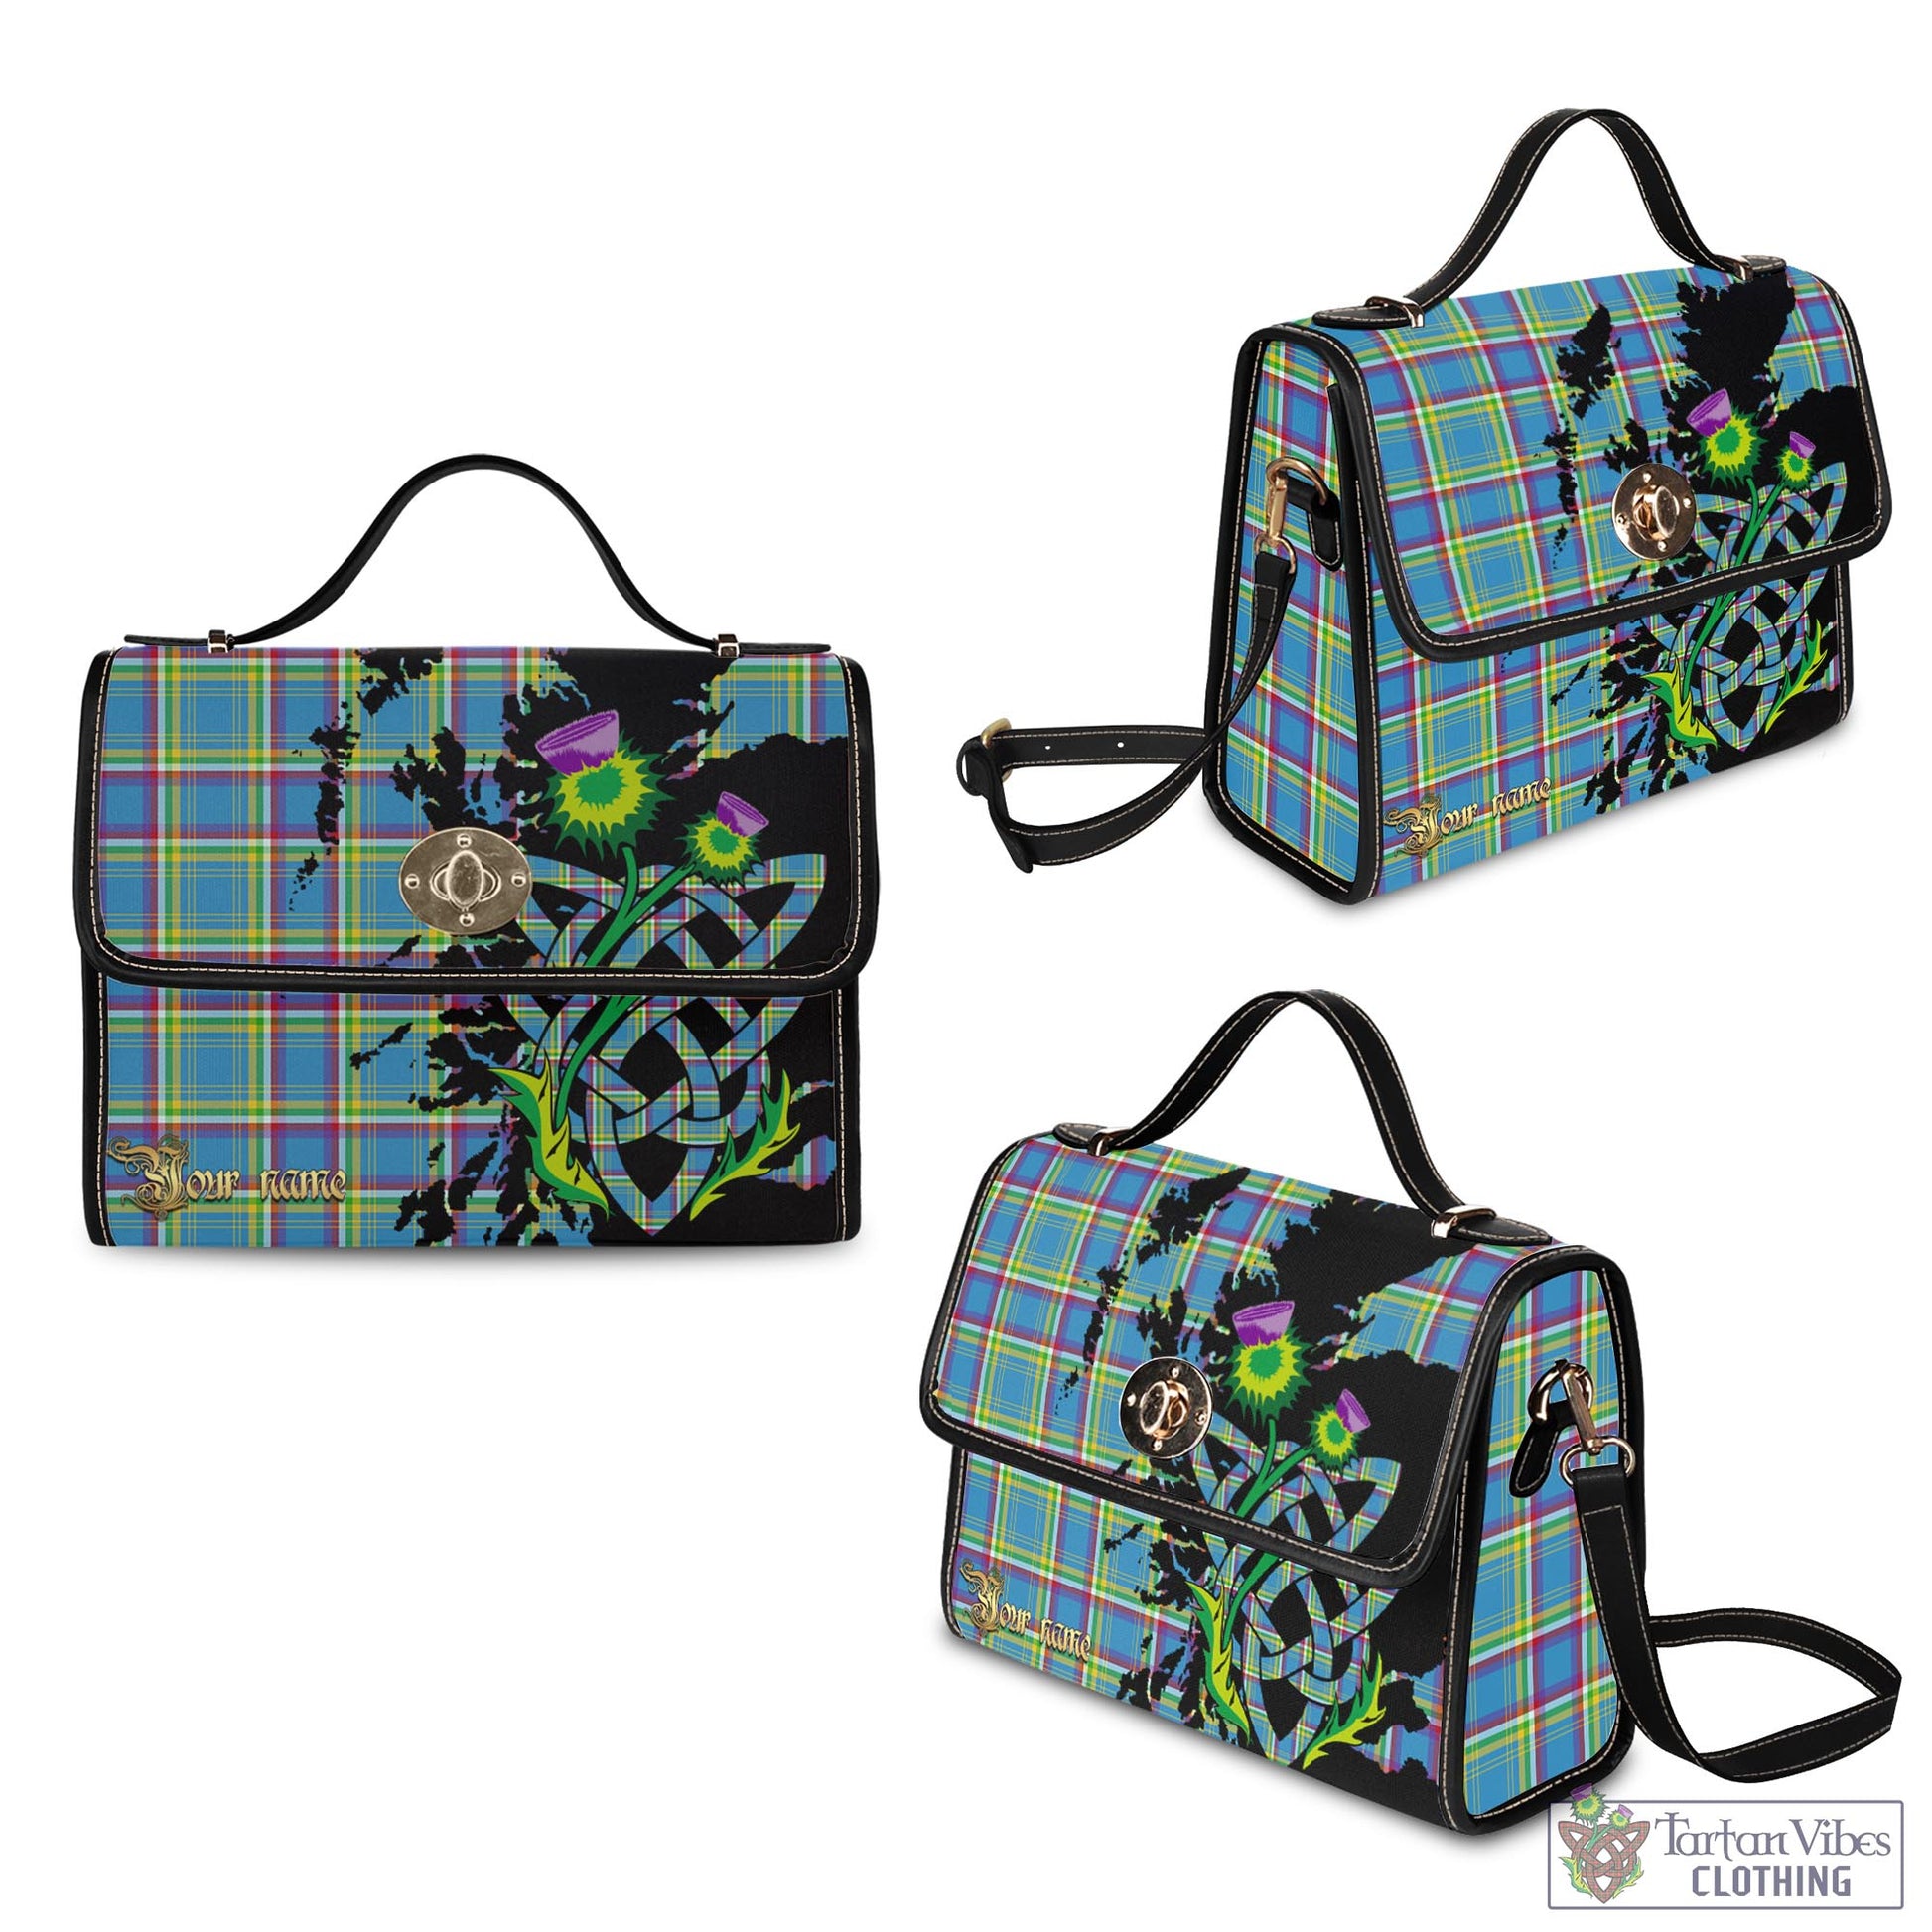 Tartan Vibes Clothing Yukon Territory Canada Tartan Waterproof Canvas Bag with Scotland Map and Thistle Celtic Accents